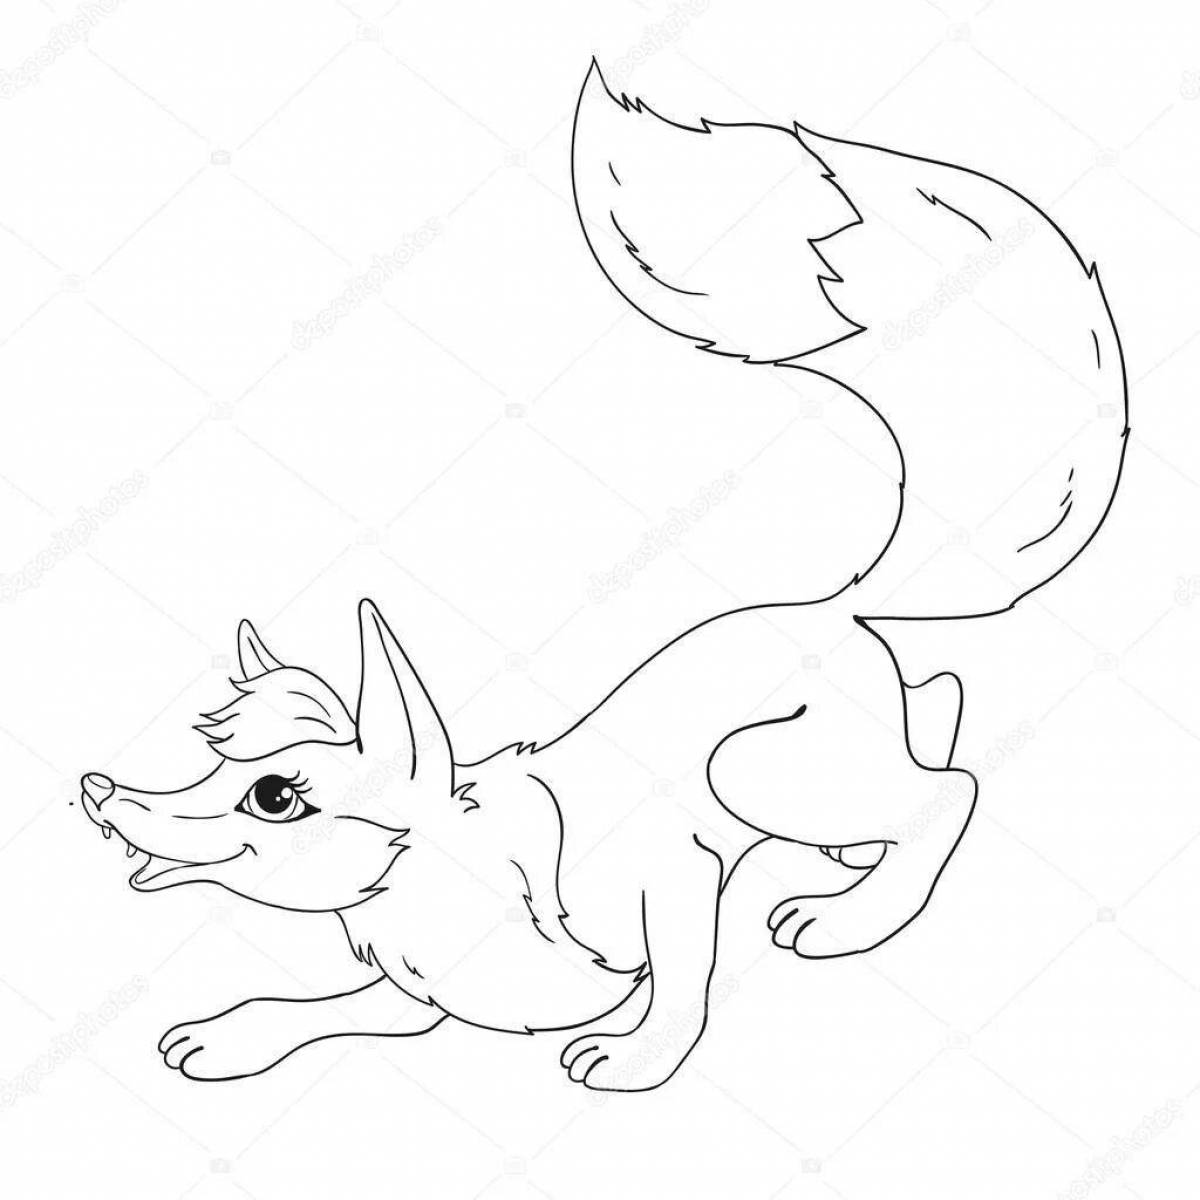 Coloring book gorgeous sly fox